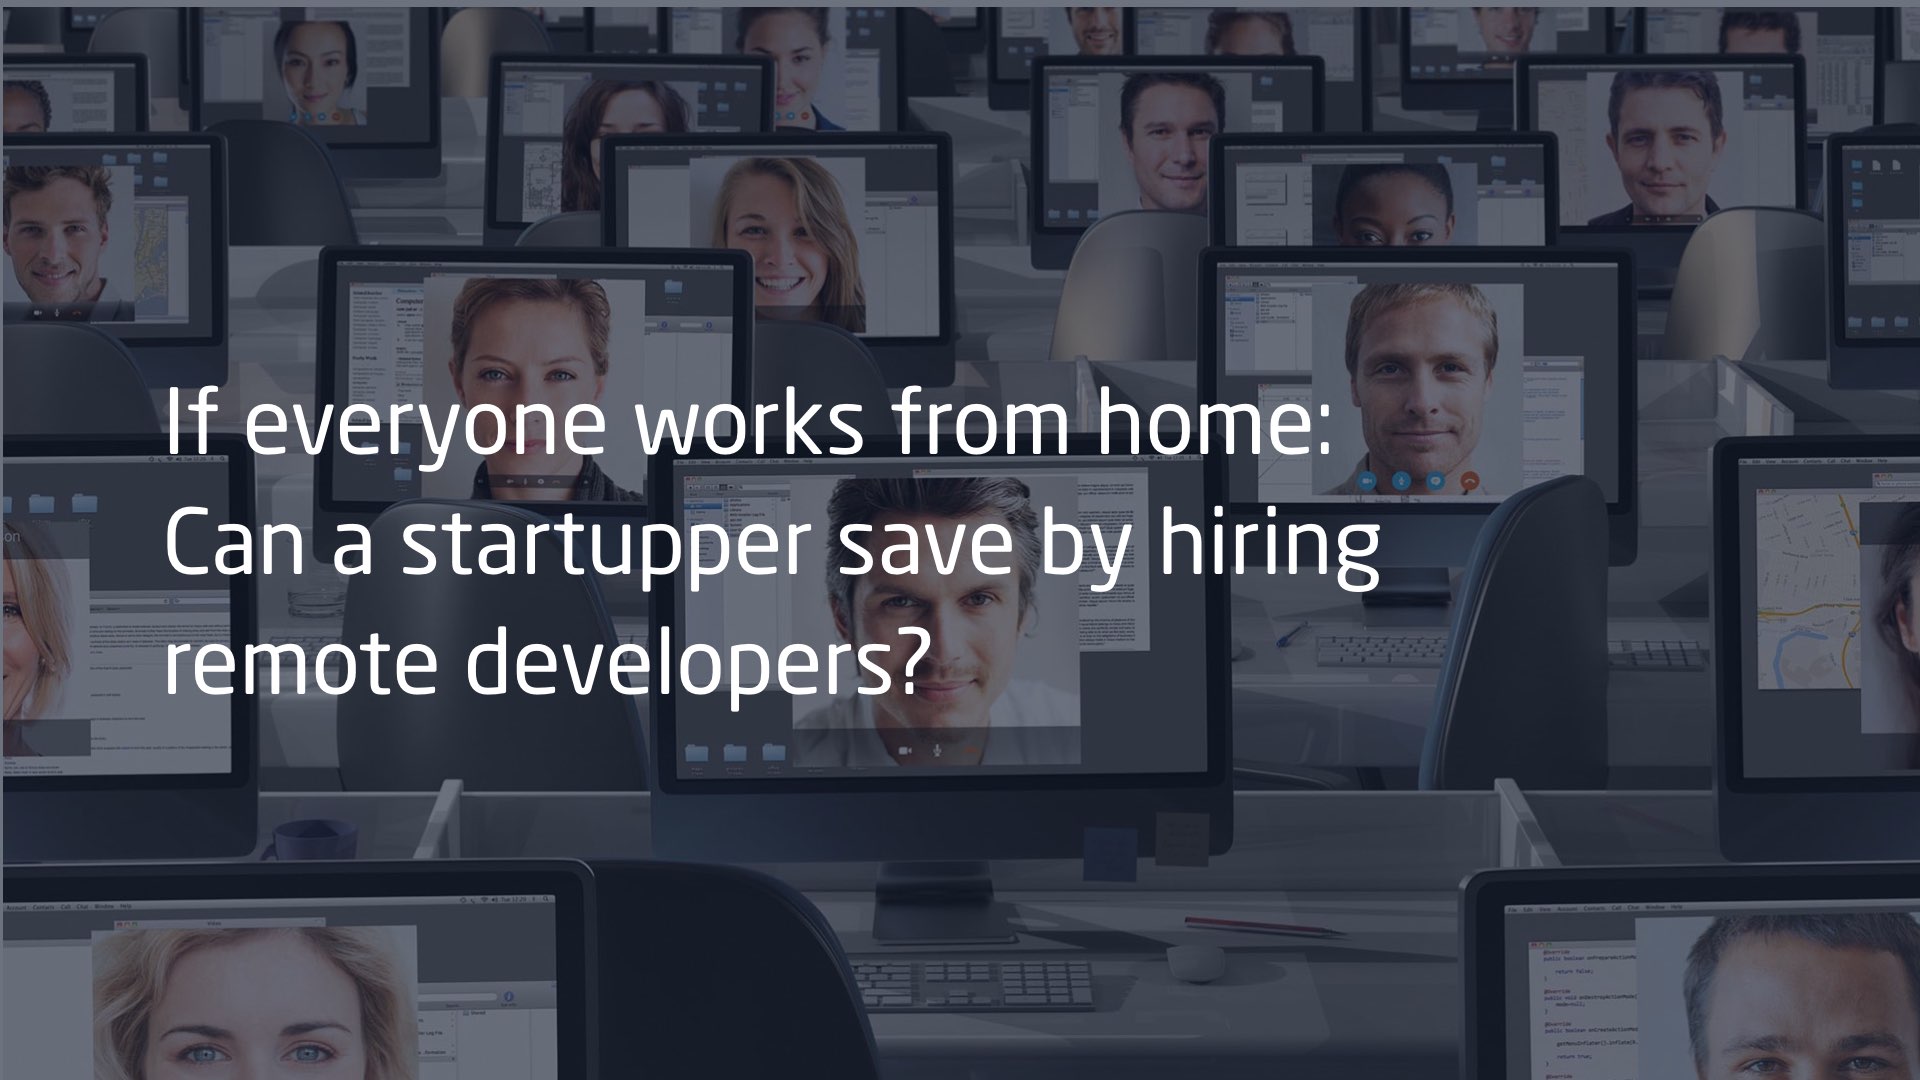 If everyone works from home: Can a startupper save by hiring remote developers?